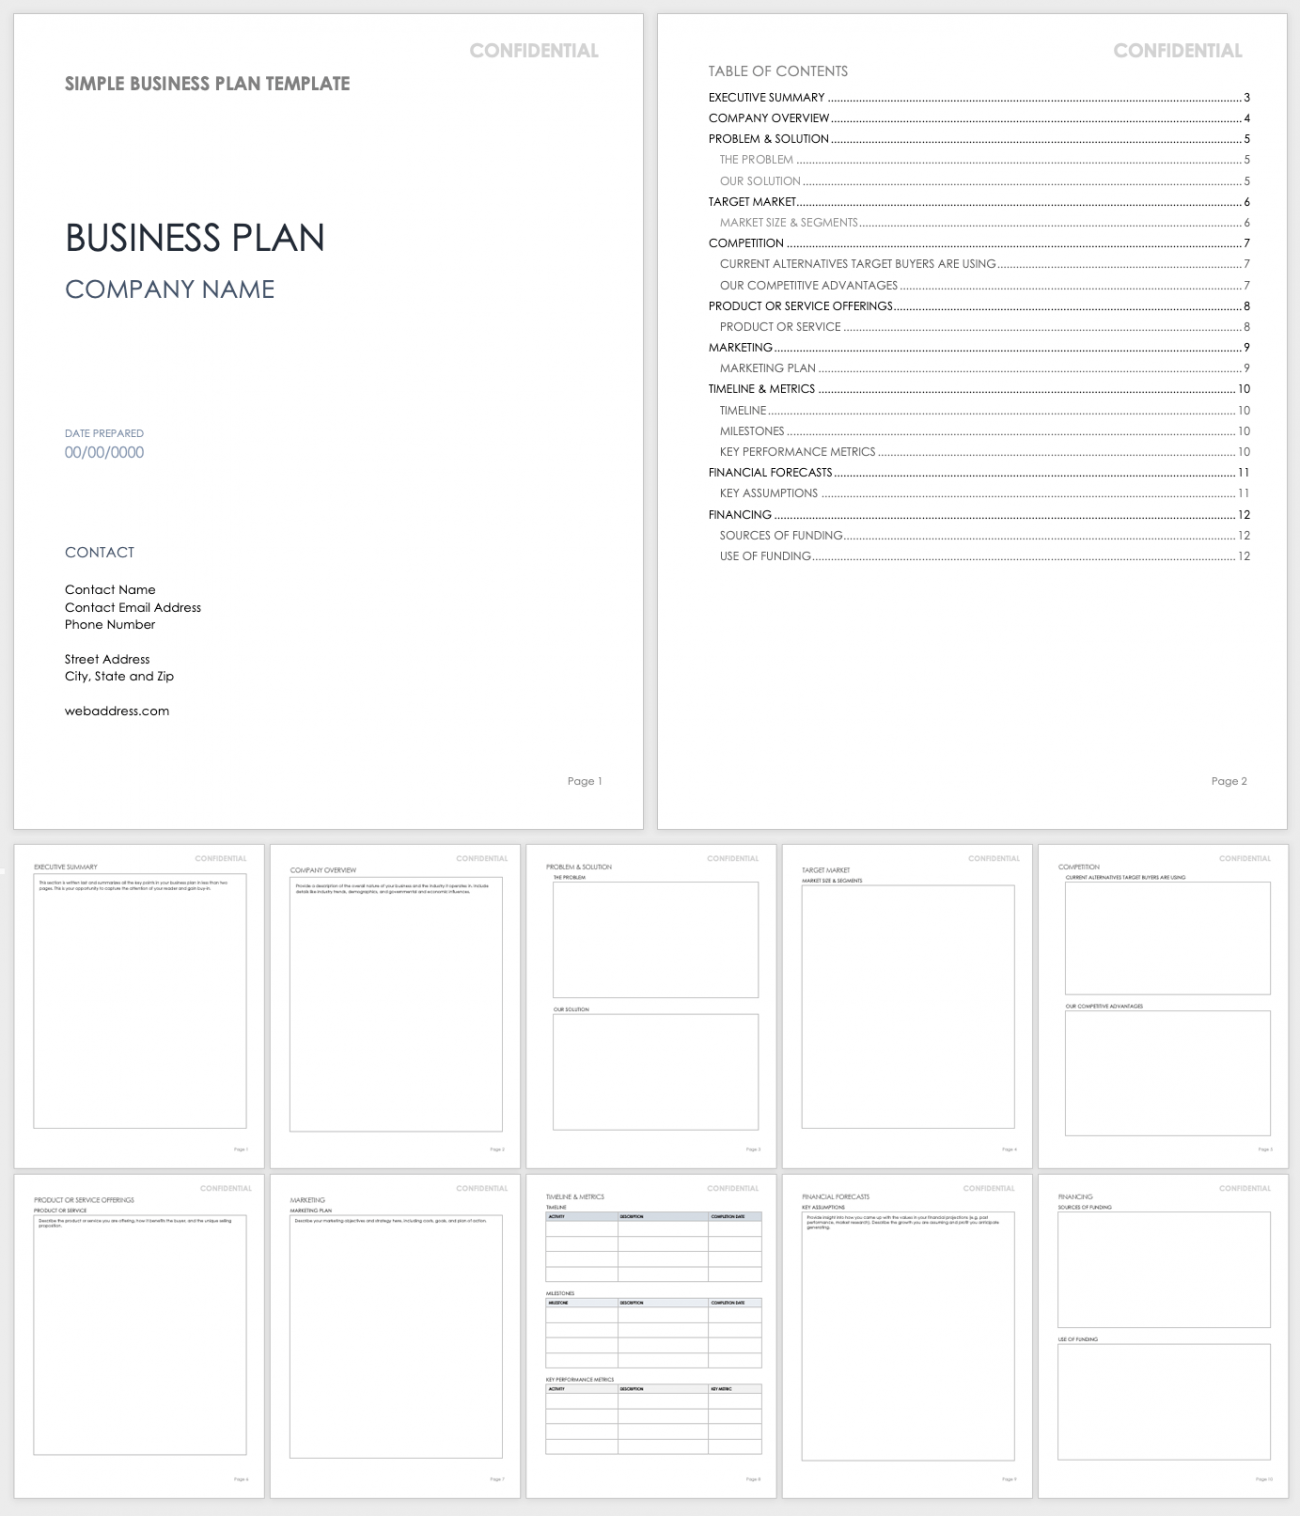 business-plan-for-cafe-free-template-cafe-business-plan-template